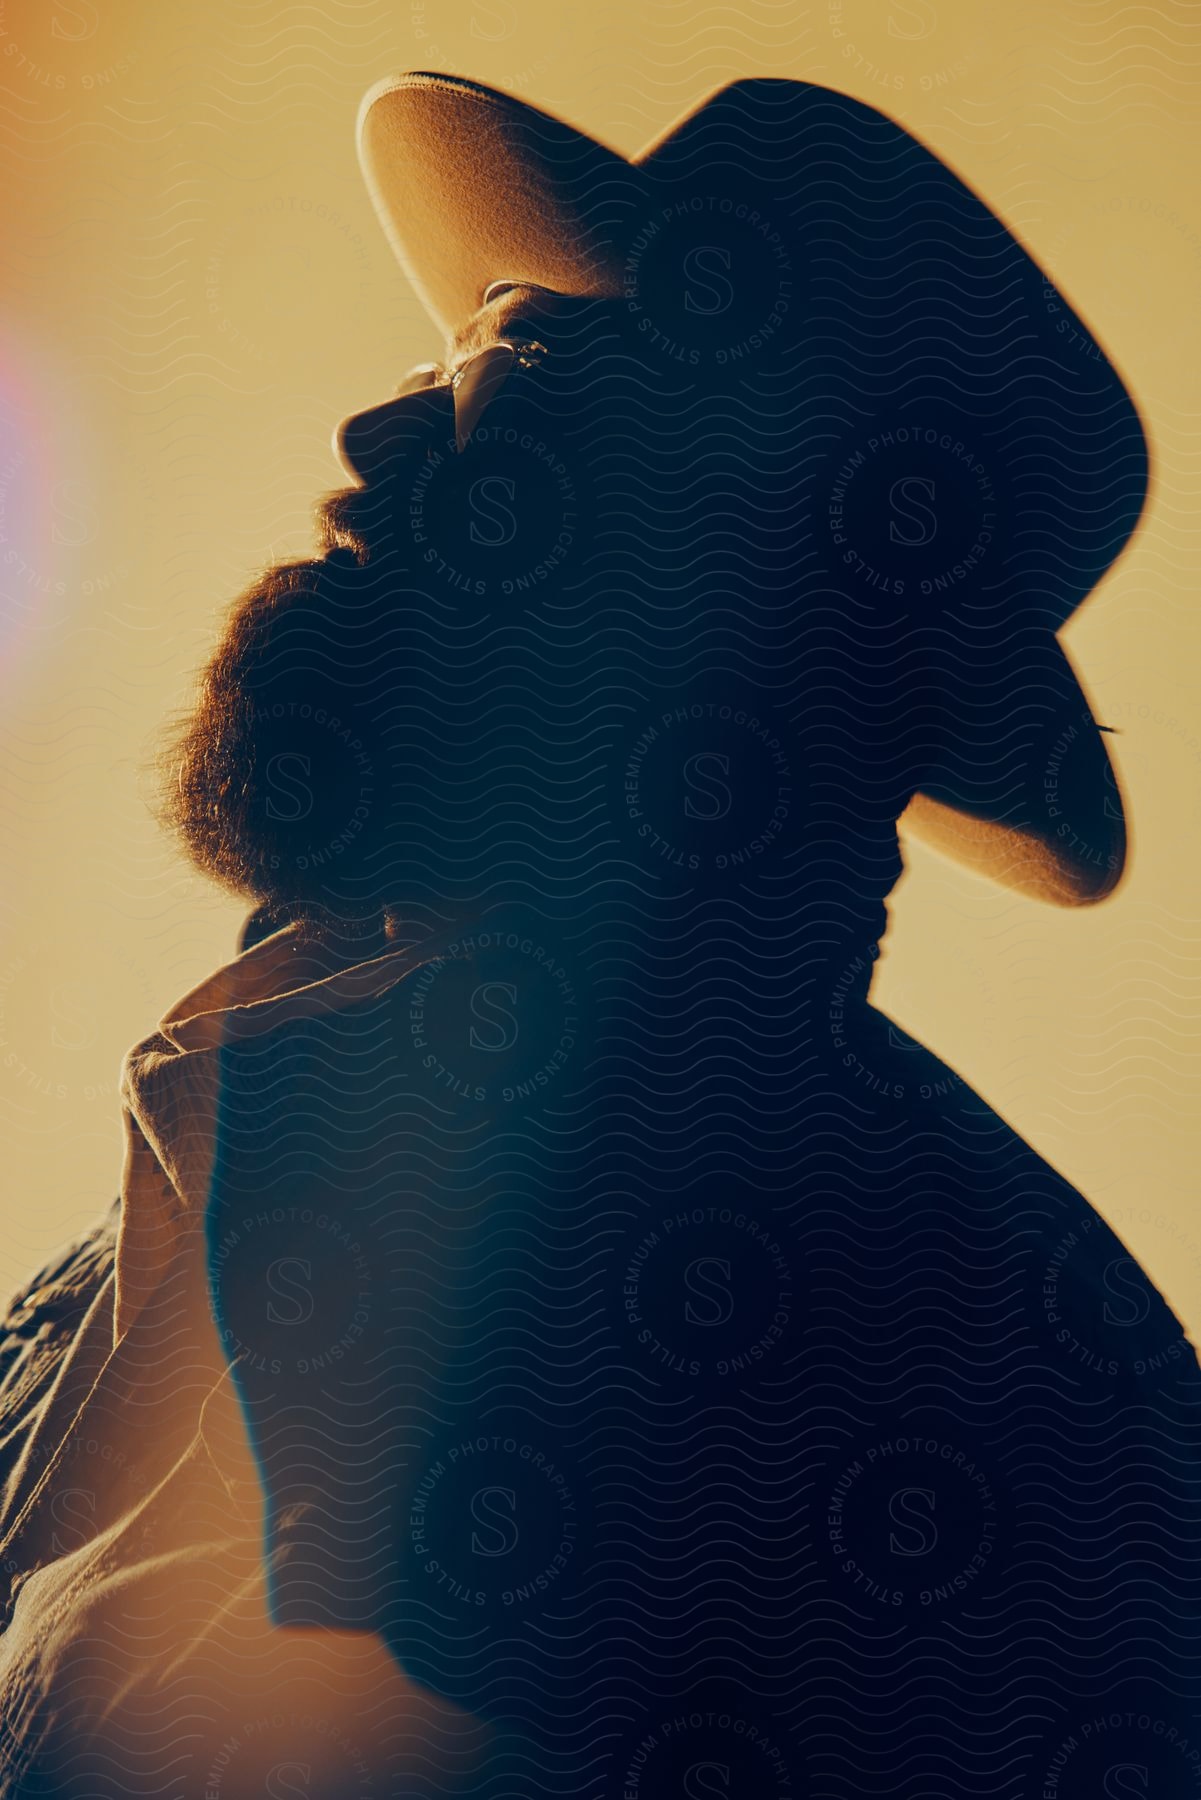 Stock photo of silhouette of a bearded man wearing a hat at evening looking up